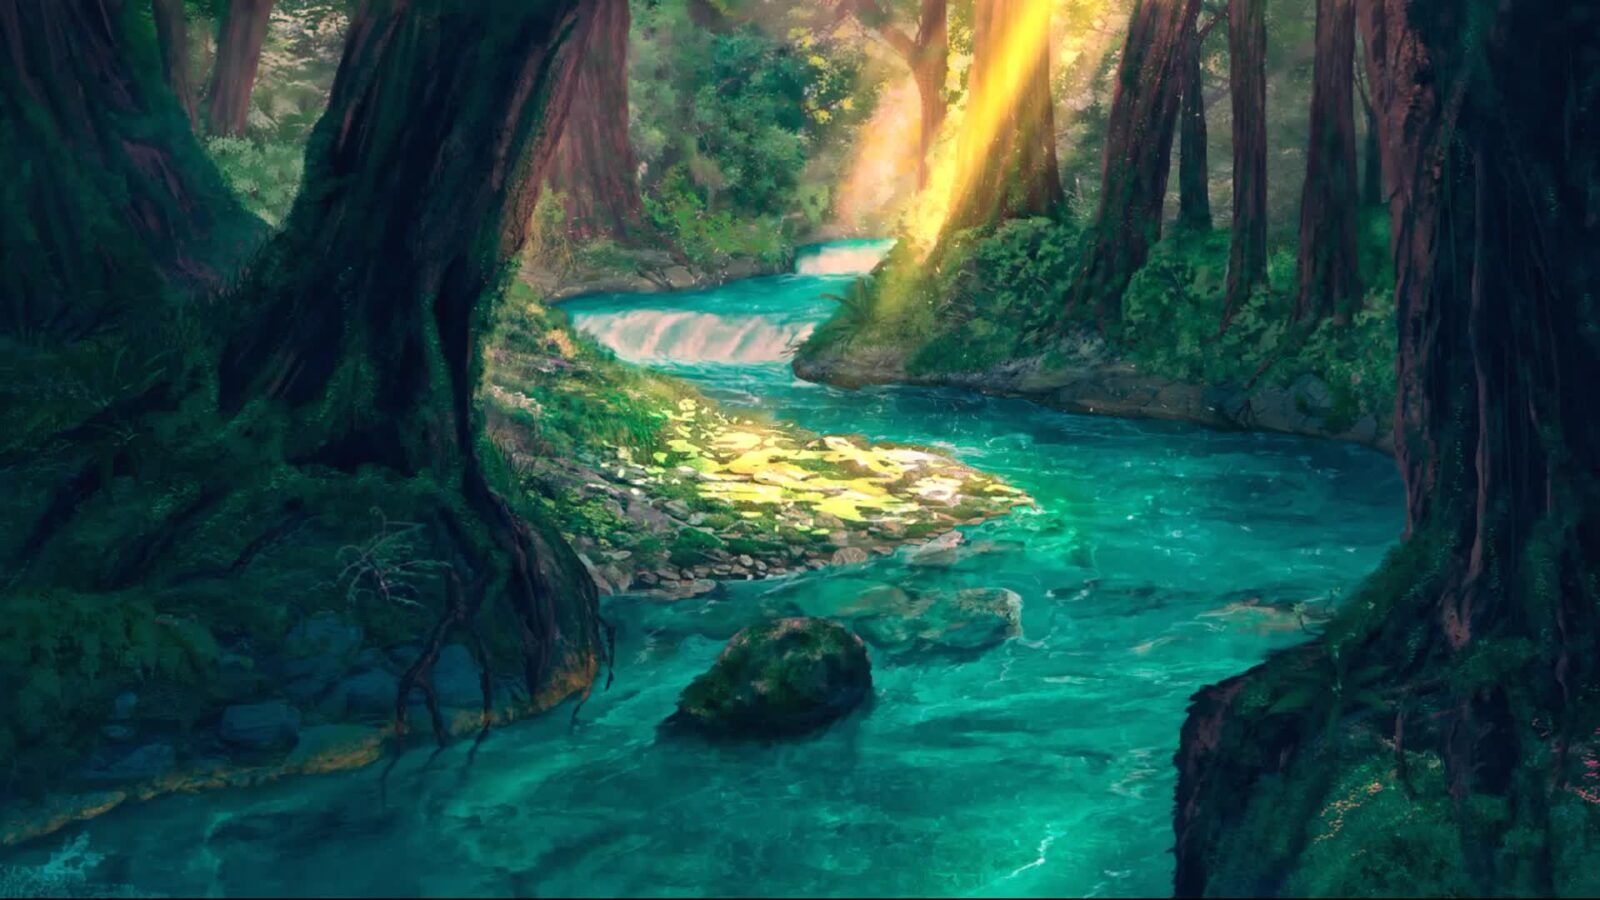 Fantasy Forest And Magic River - Animated Wallpaper - Live Desktop